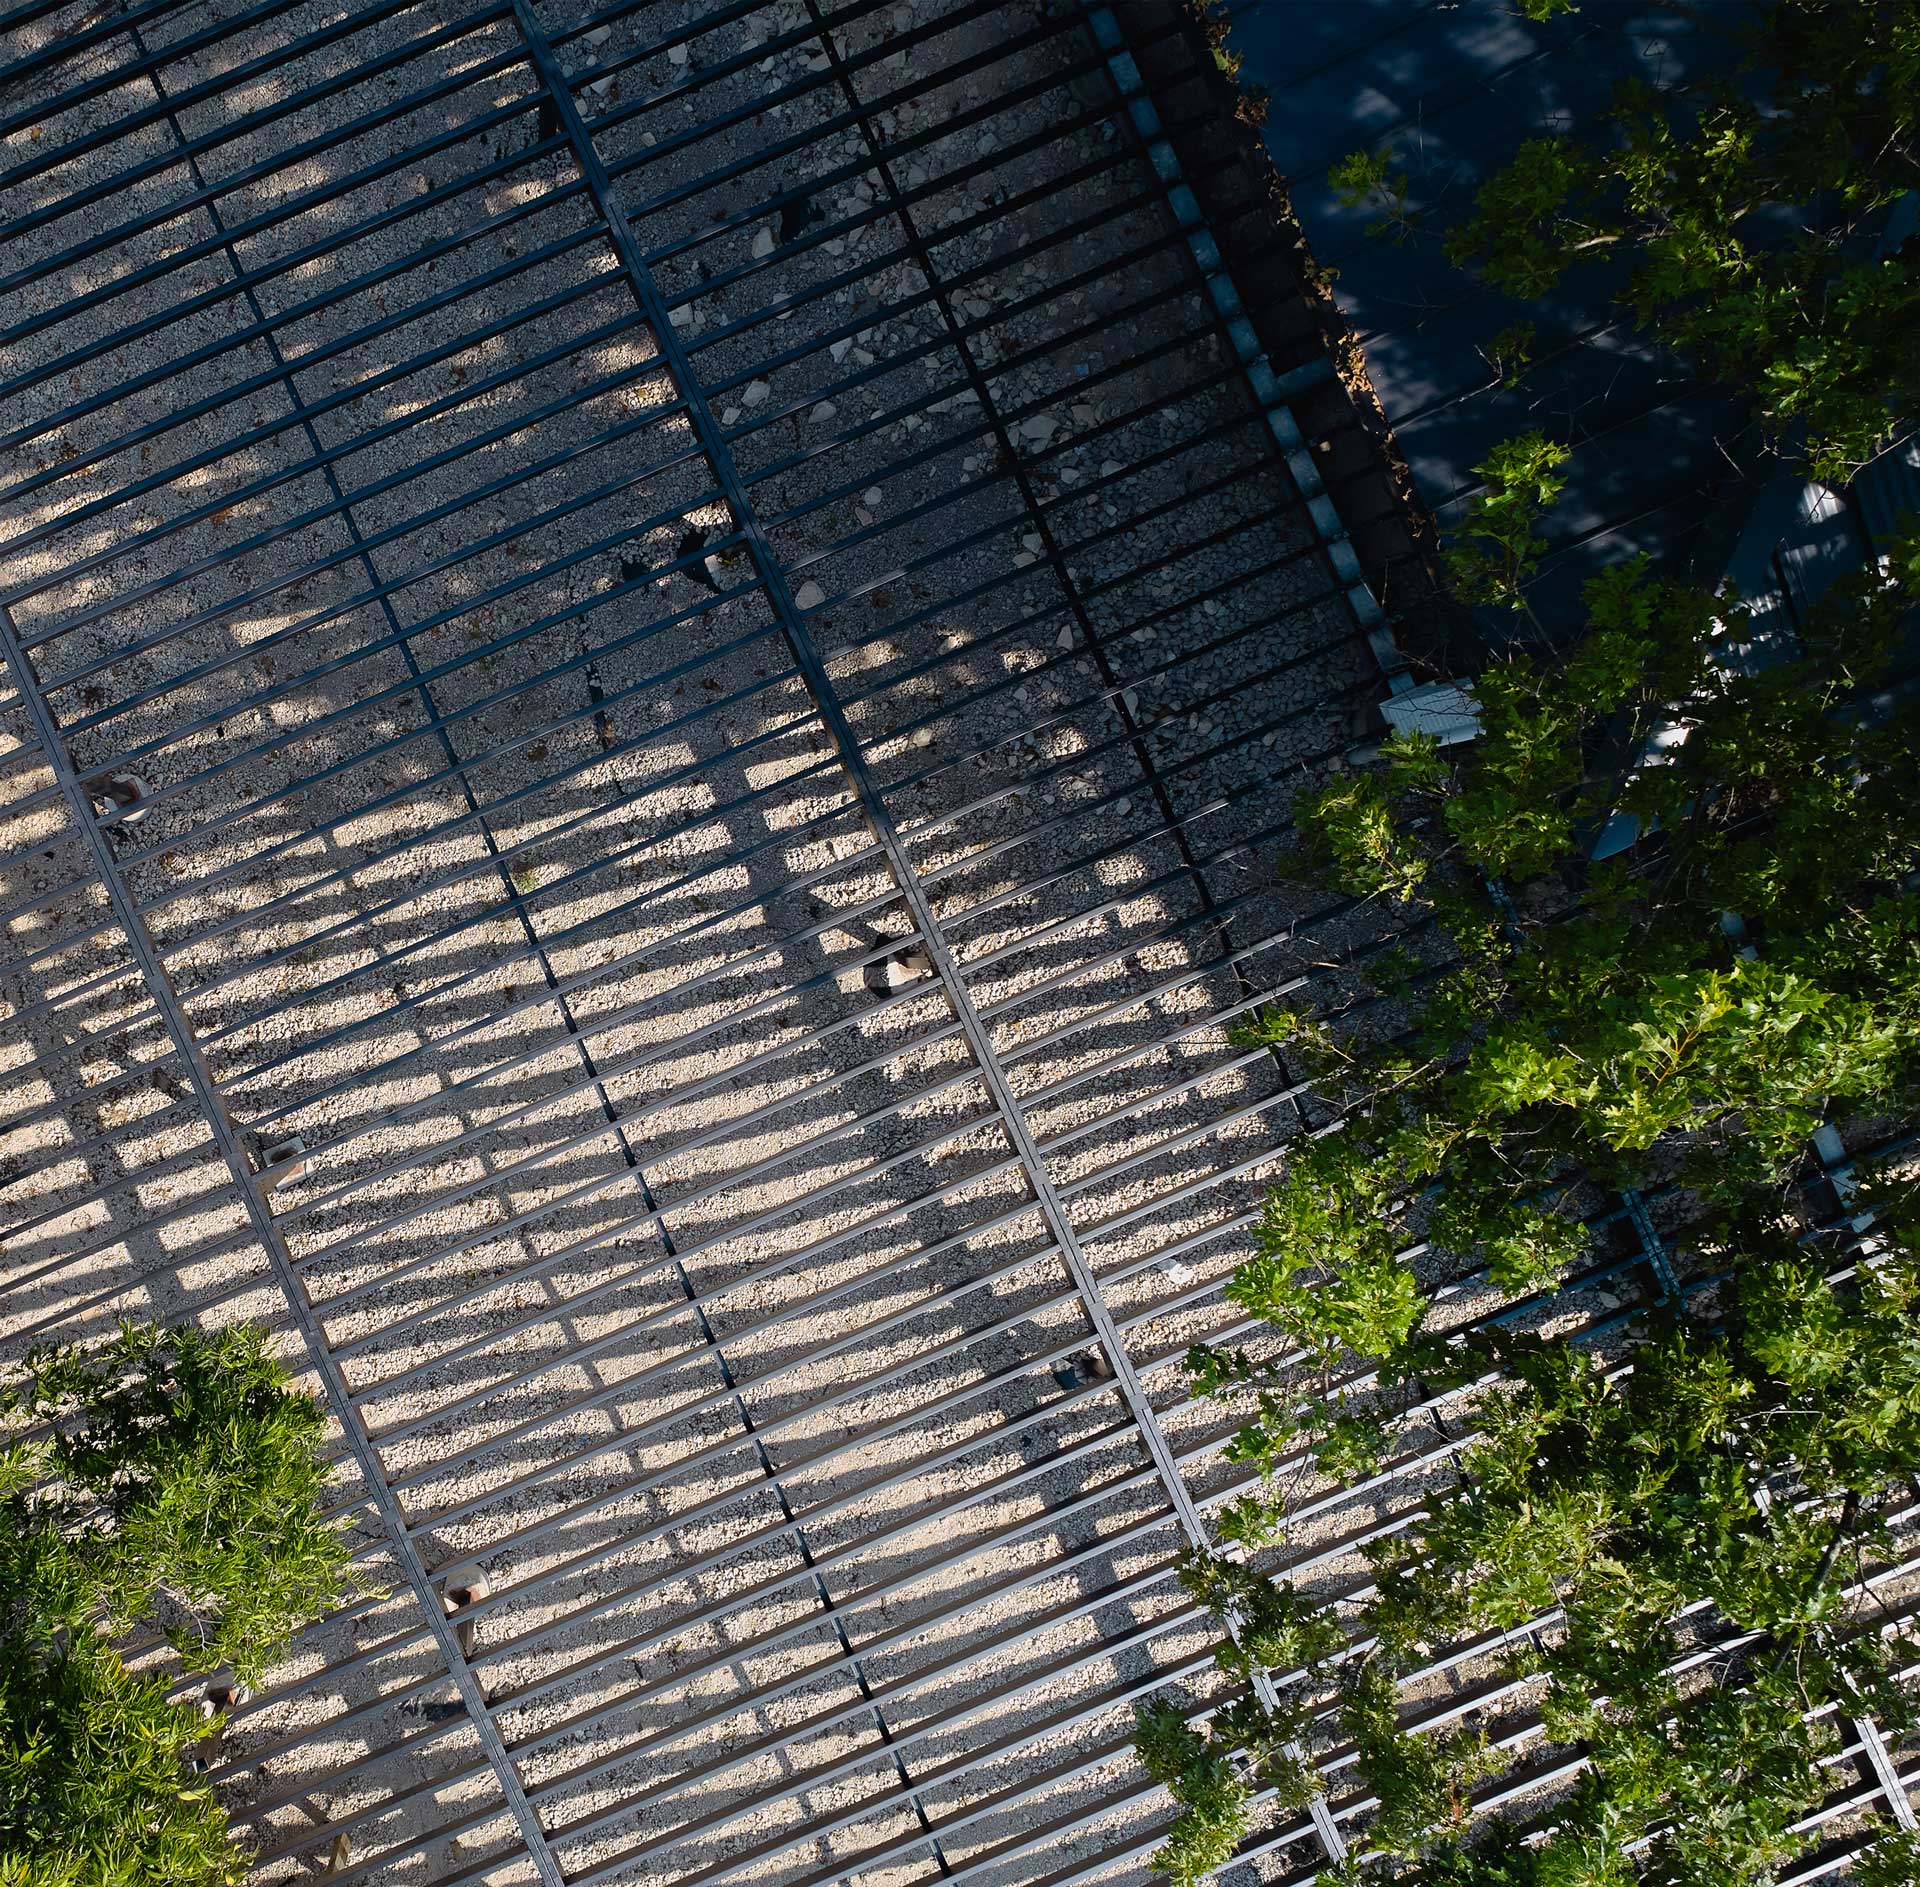 Top view of steel deck substructure with shadows and greenery.